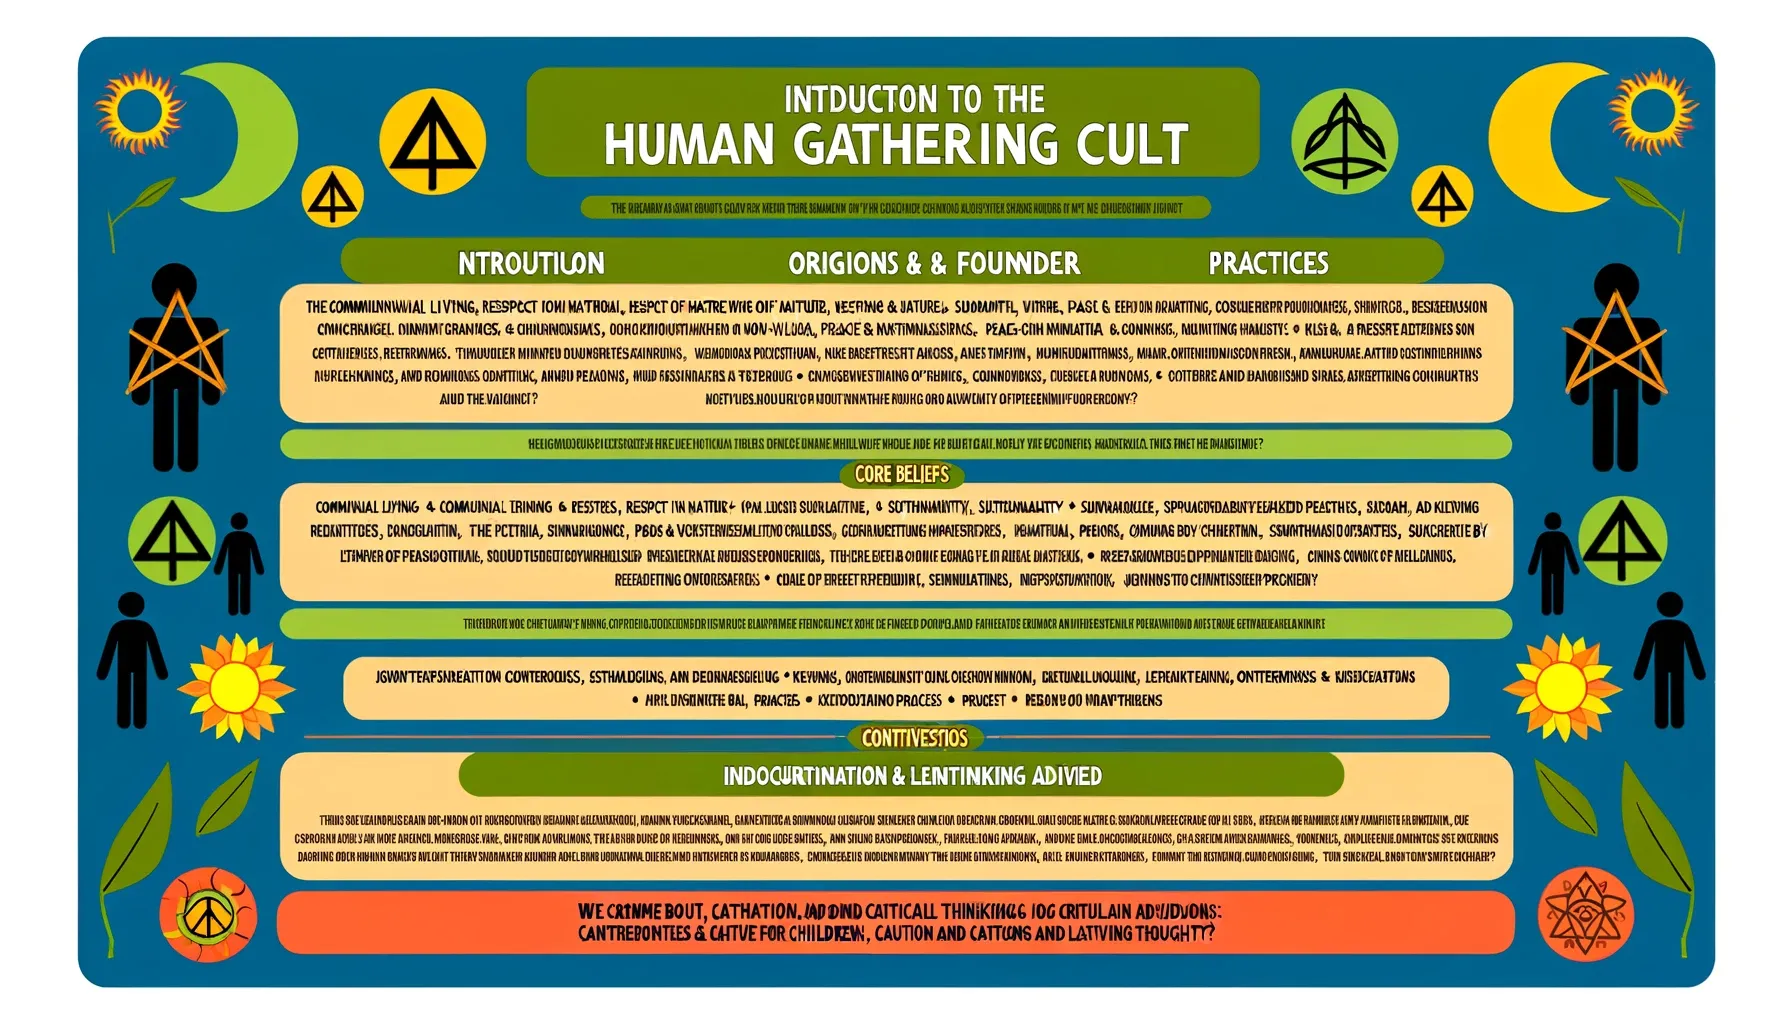 The Human Gathering Cult